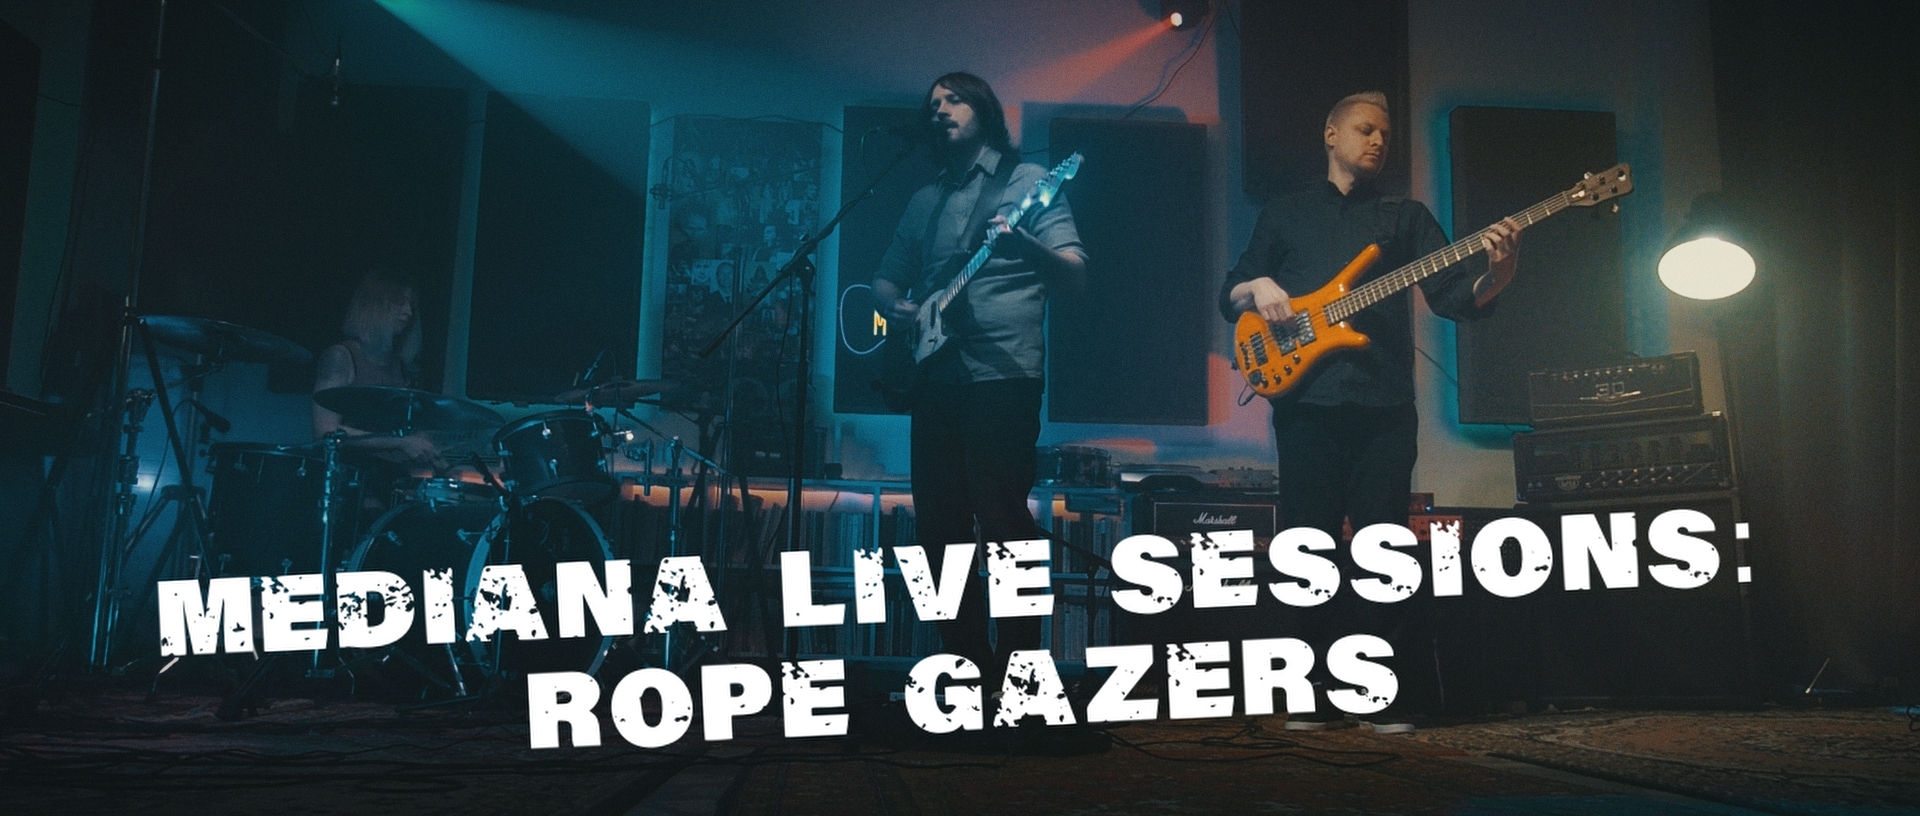 Mediana live sessions: Rope Gazers